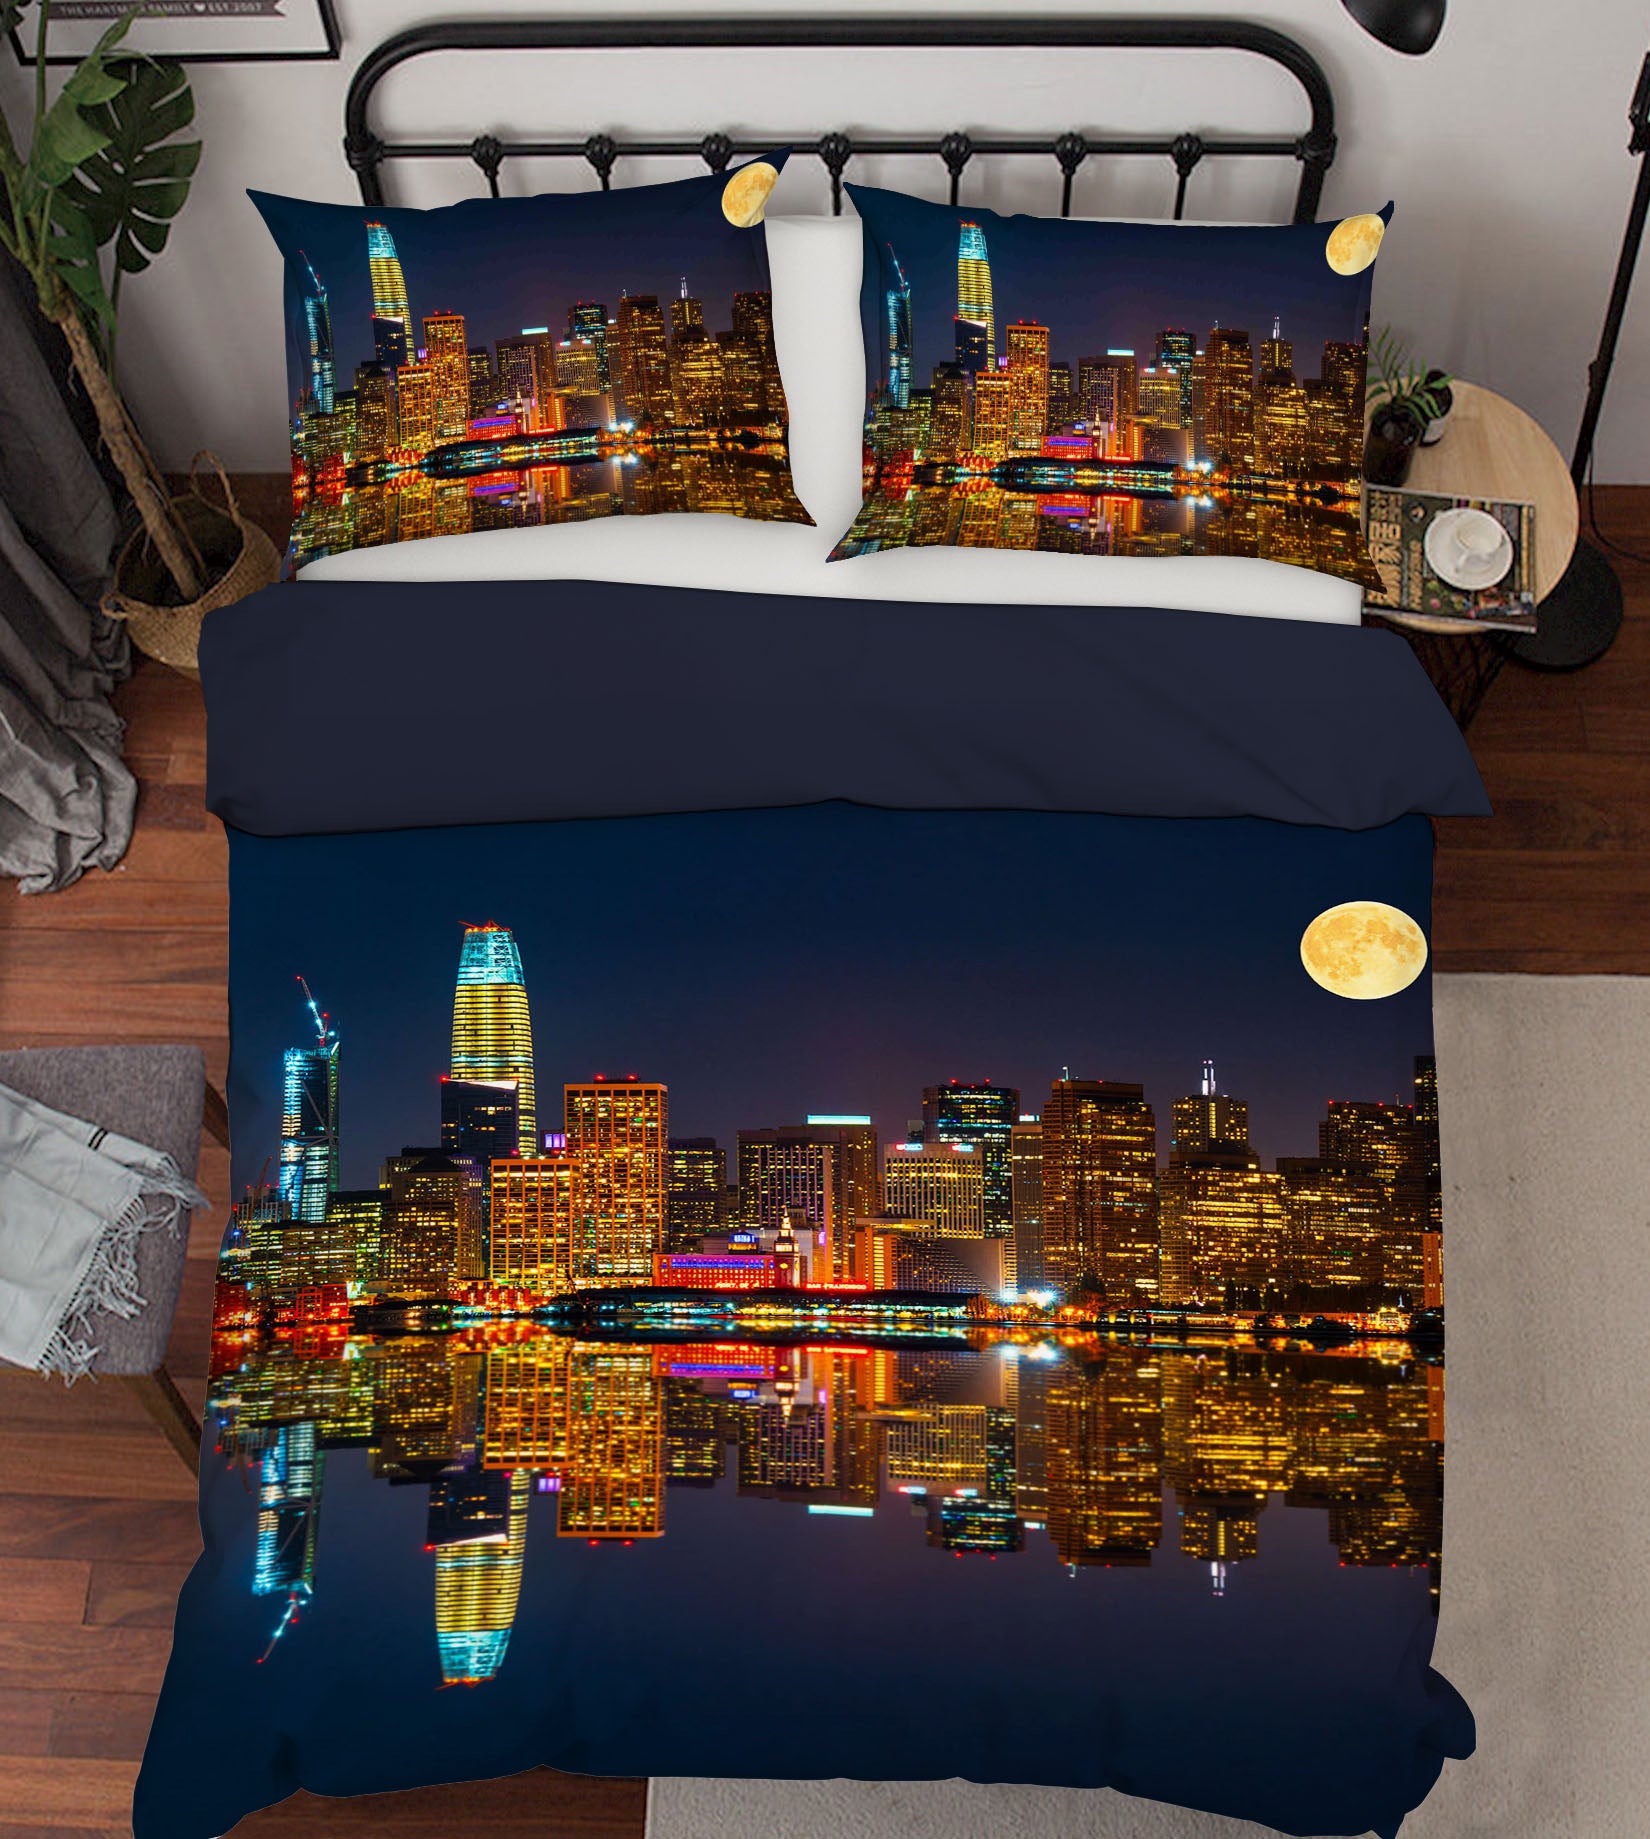 3D Seaside City 2116 Marco Carmassi Bedding Bed Pillowcases Quilt